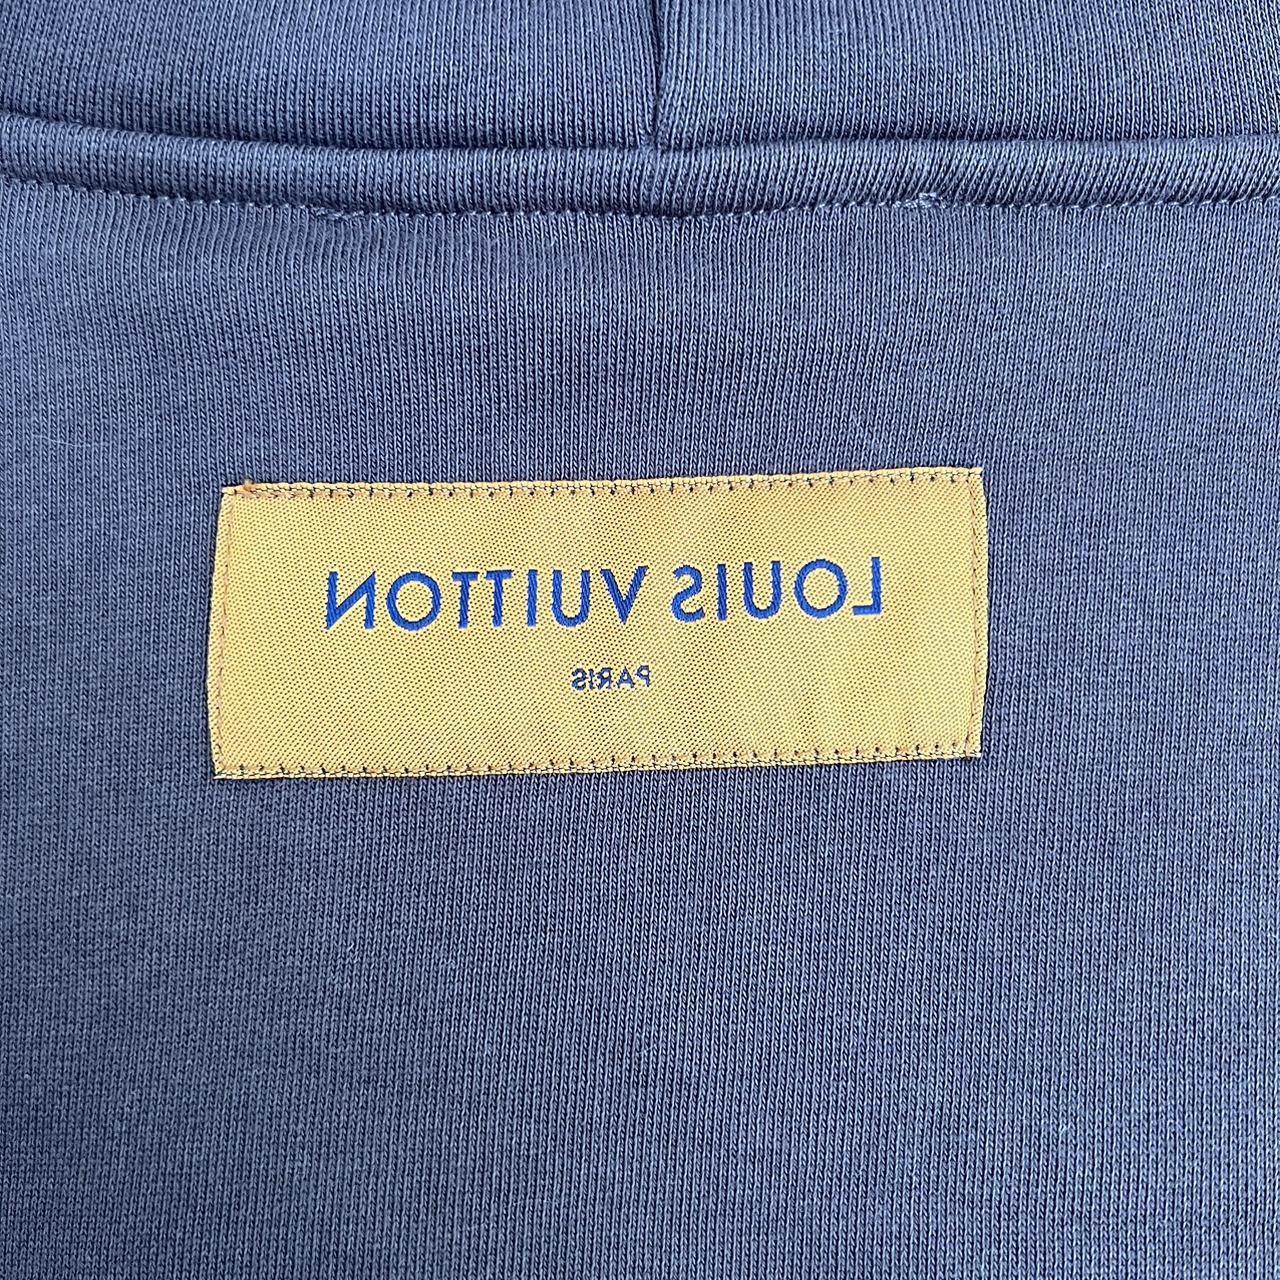 Graphic Bee Patched Hoodie by LV - BRAND NEW, This